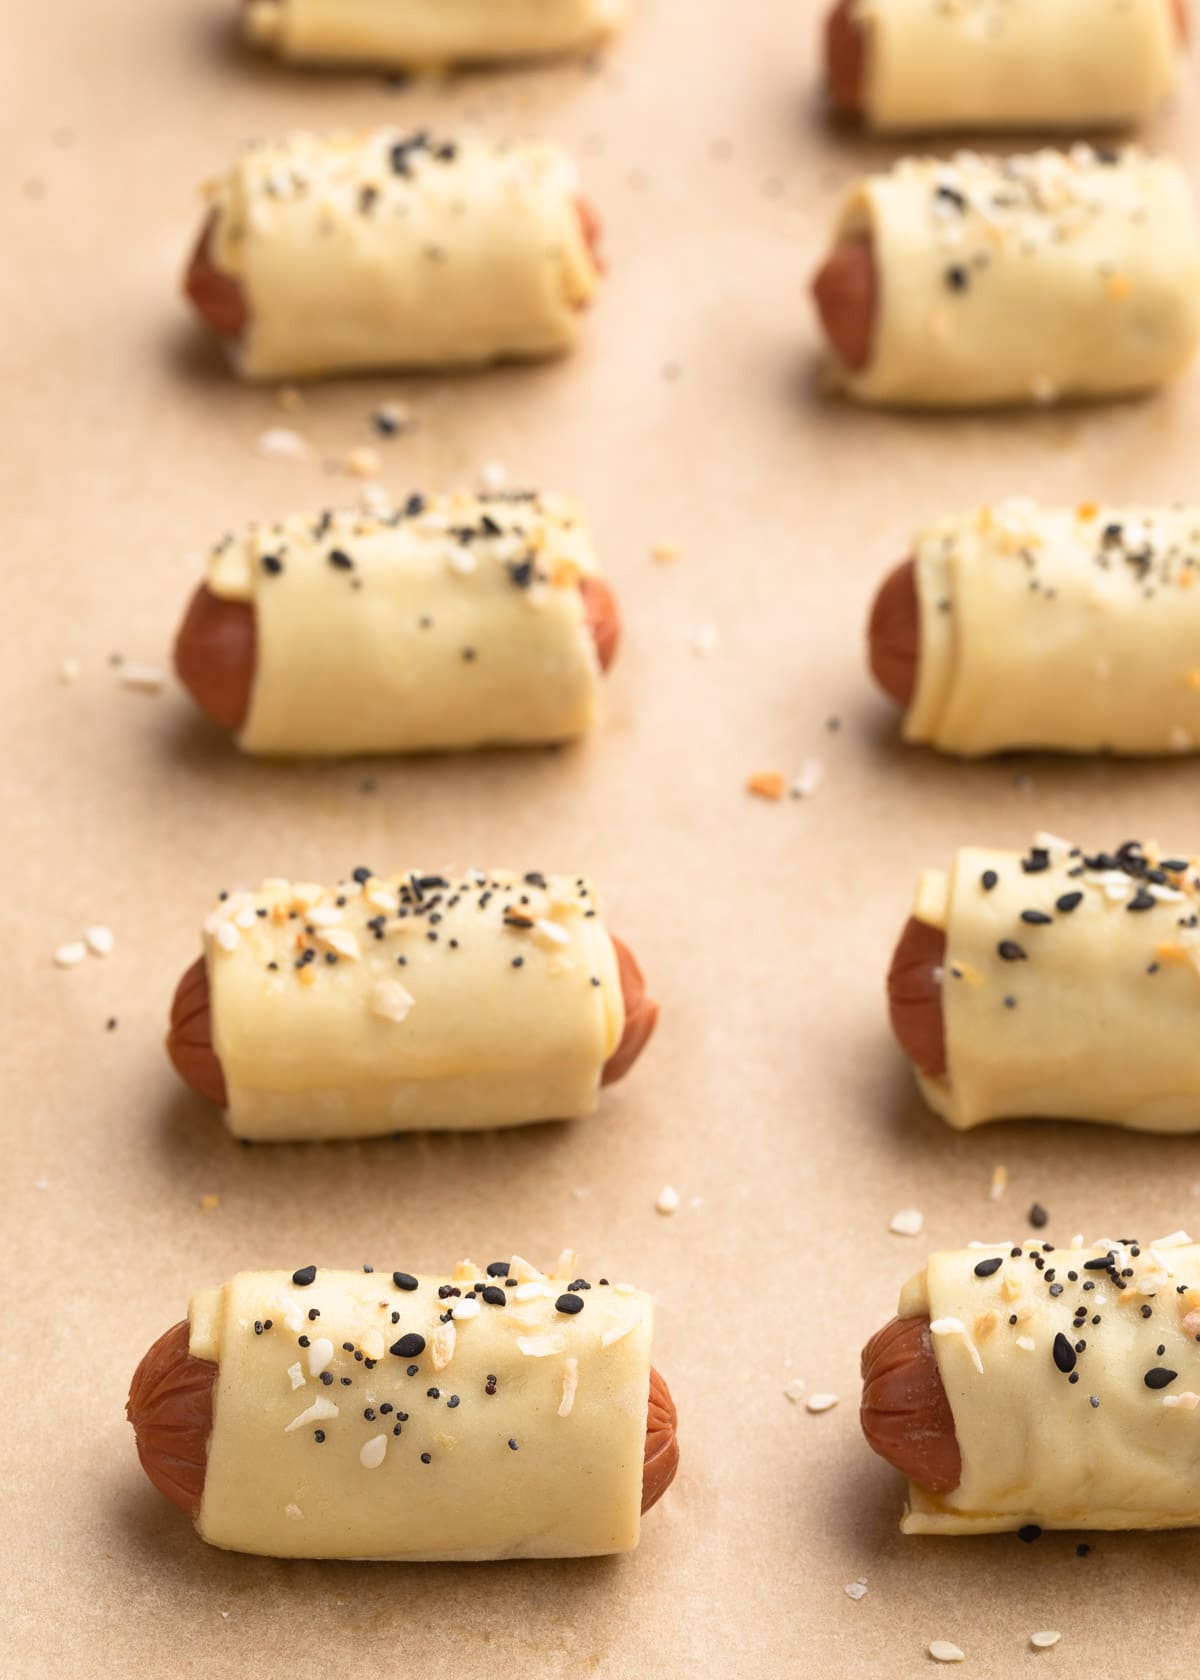 unbaked pigs in a blanket sprinkled with everything bagel seasoning on a parchment lined baking sheet